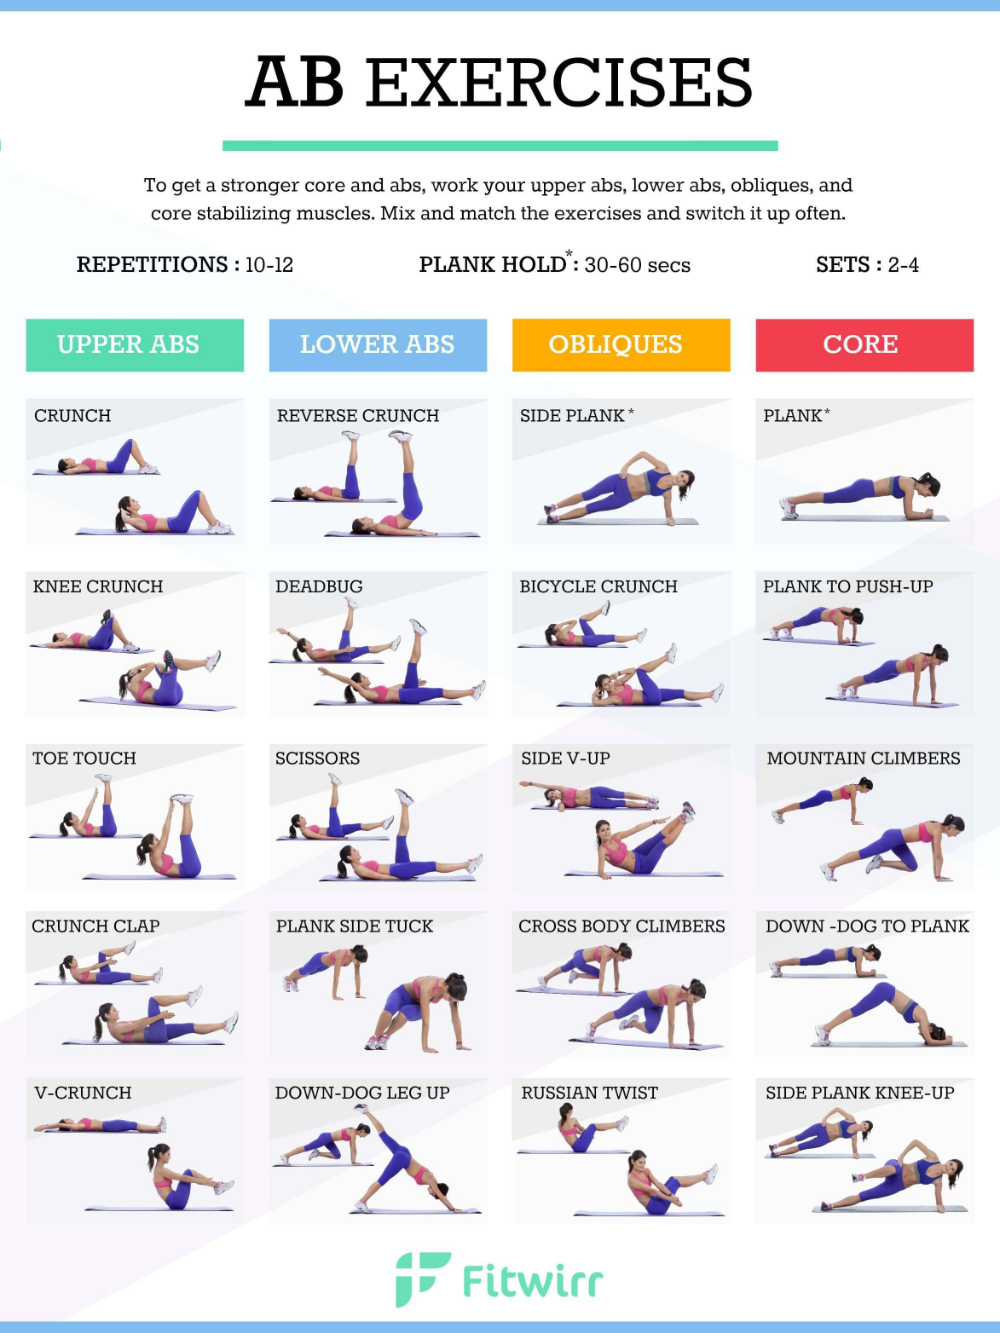 Here's a List of the Absolute Best Abs Exercises of All Time - Here's a List of the Absolute Best Abs Exercises of All Time -   18 fitness Exercises gym ideas